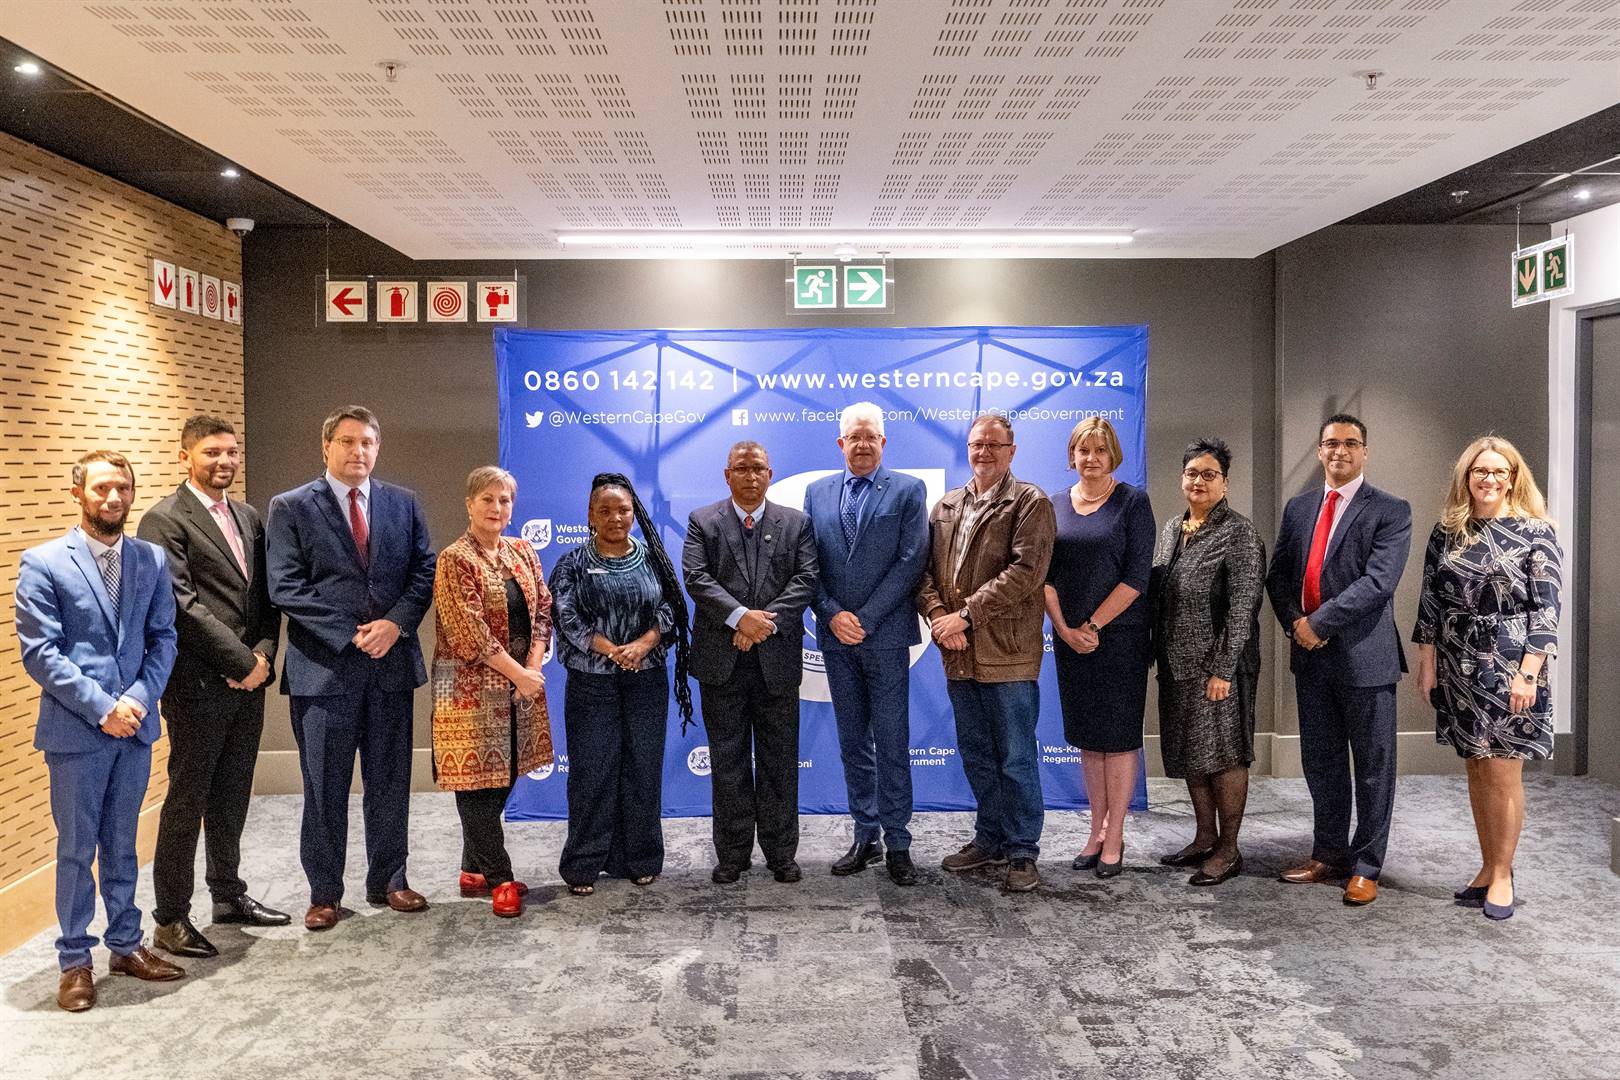 A the announcement of the new Western Cape cabinet is from left Reagen Allen, Daylin Mitchell, David Maynier, Anroux Marais,  Nomafrench Mbombo, Ivan Meyer, Premier Alan Winde, Anton Bredell, Debbie Schäfer, previous Education MEC,  Sharna Fernandez, Tertuis Simmers and Mireille Wenger.  Photo: Jaco Marais